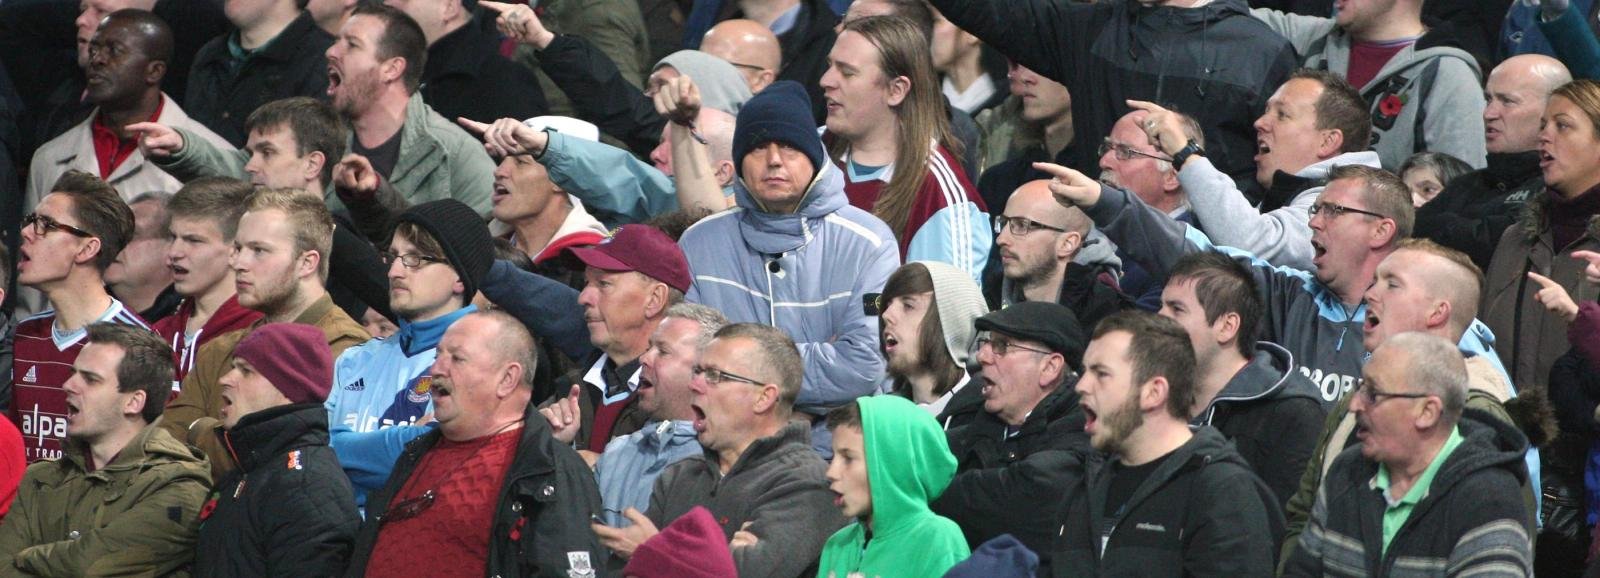 What can West Ham, and the English game in general, learn from the Germans?